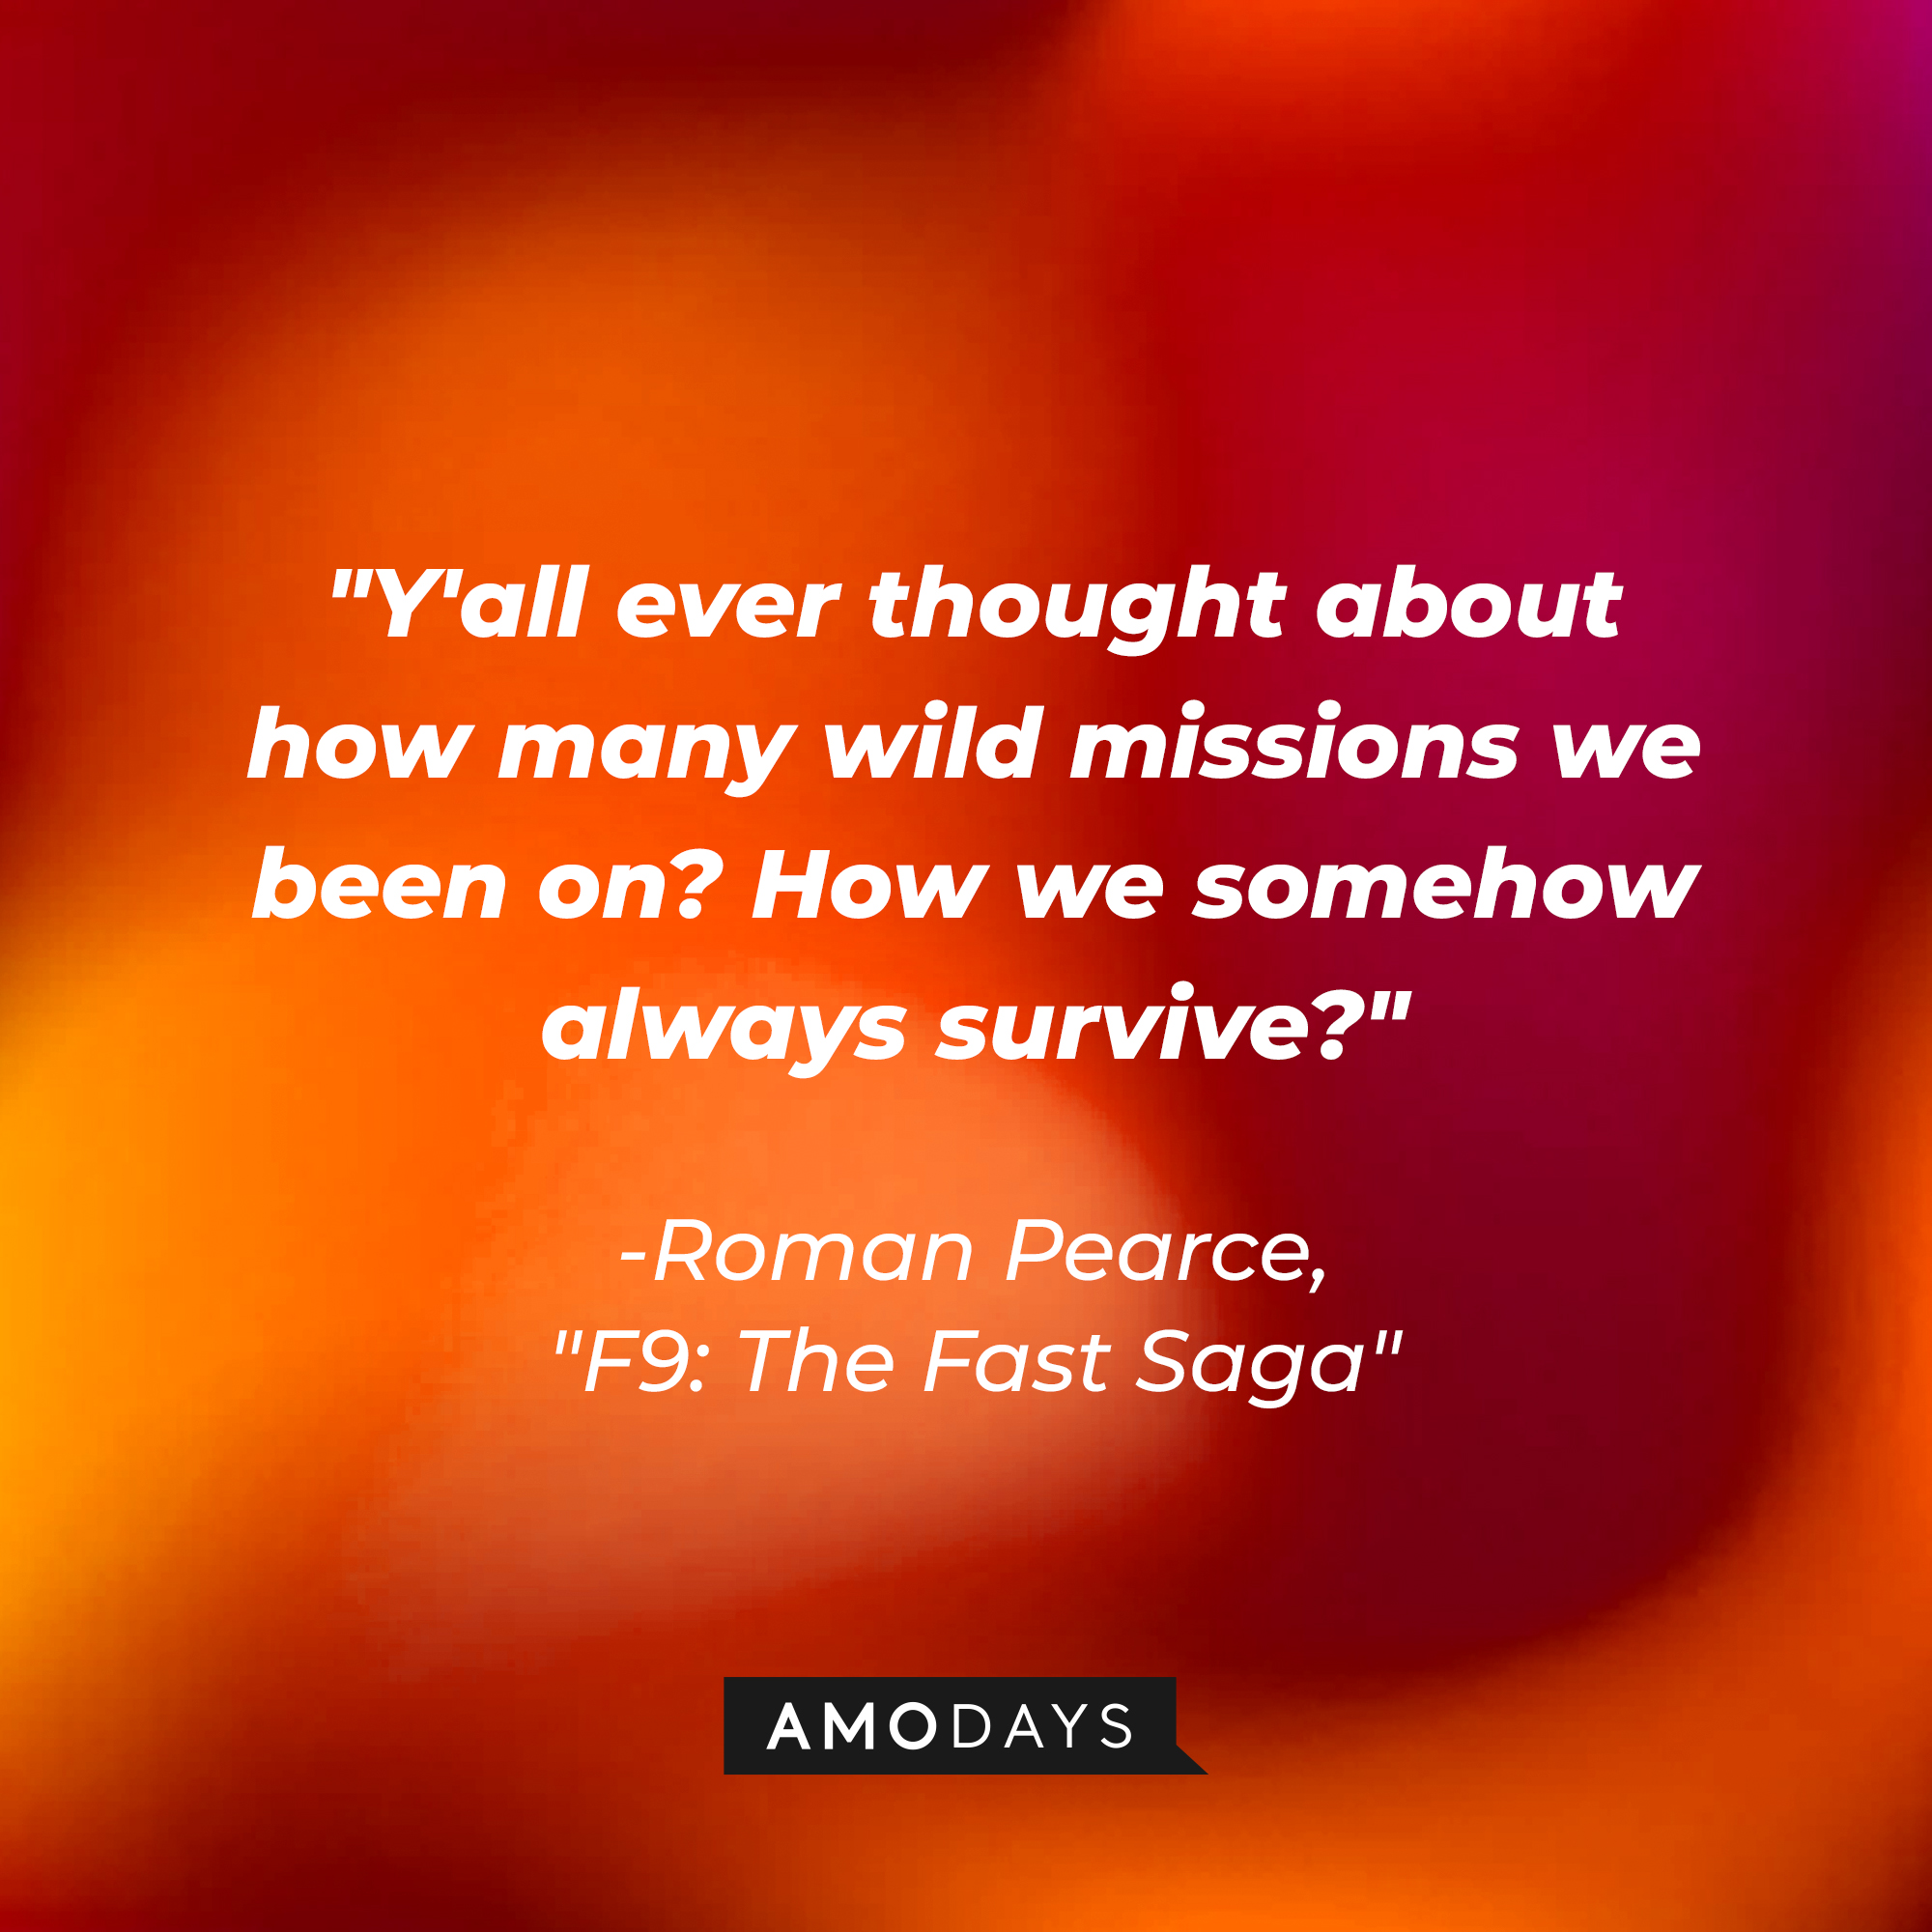 Roman Pearce’s quote: "Y'all ever thought about how many wild missions we been on? How we somehow always survive?" | Image: AmoDays